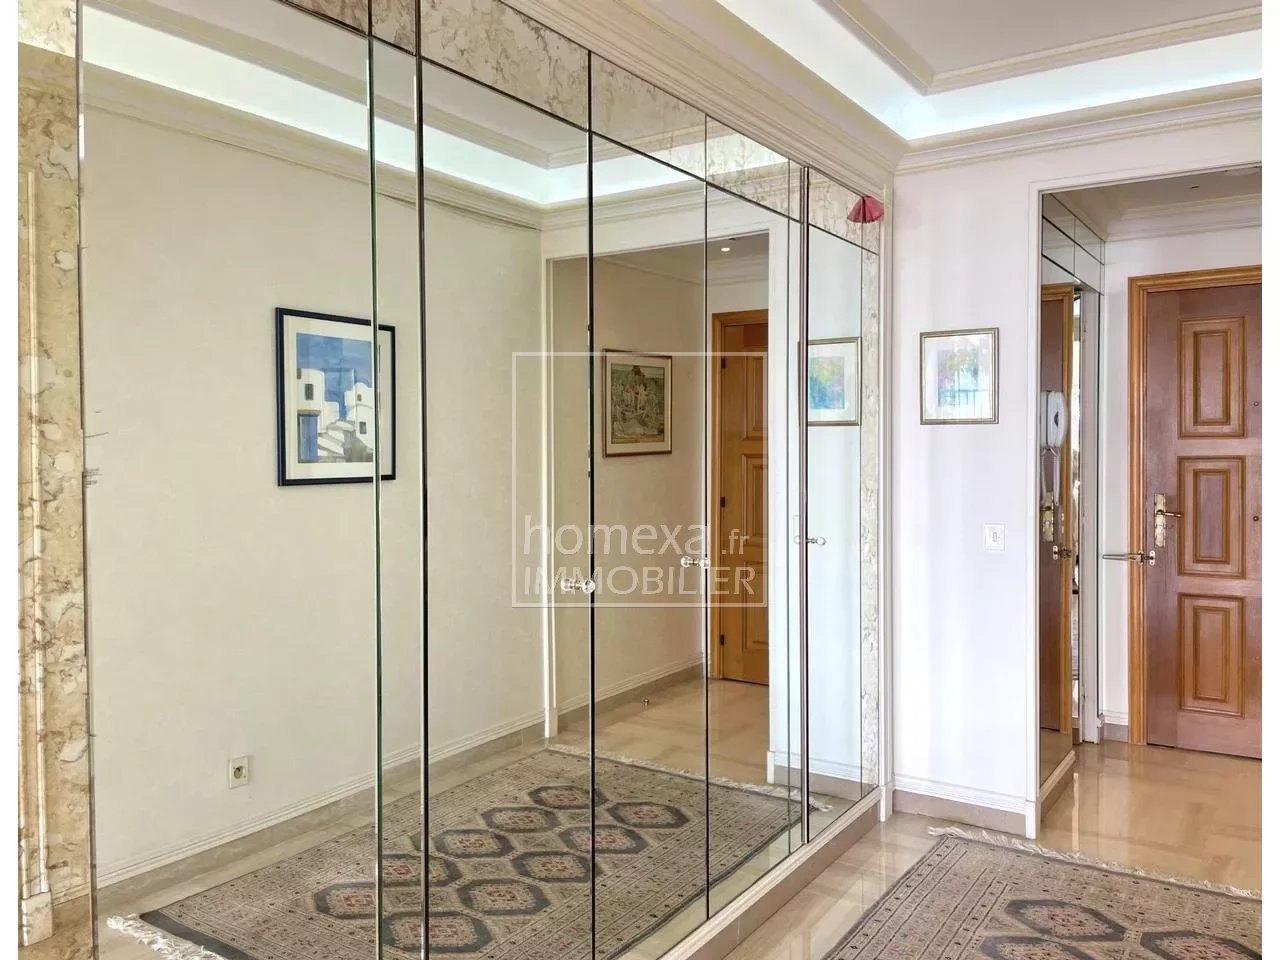 Apartment  2 Rooms 57 m²  for sale